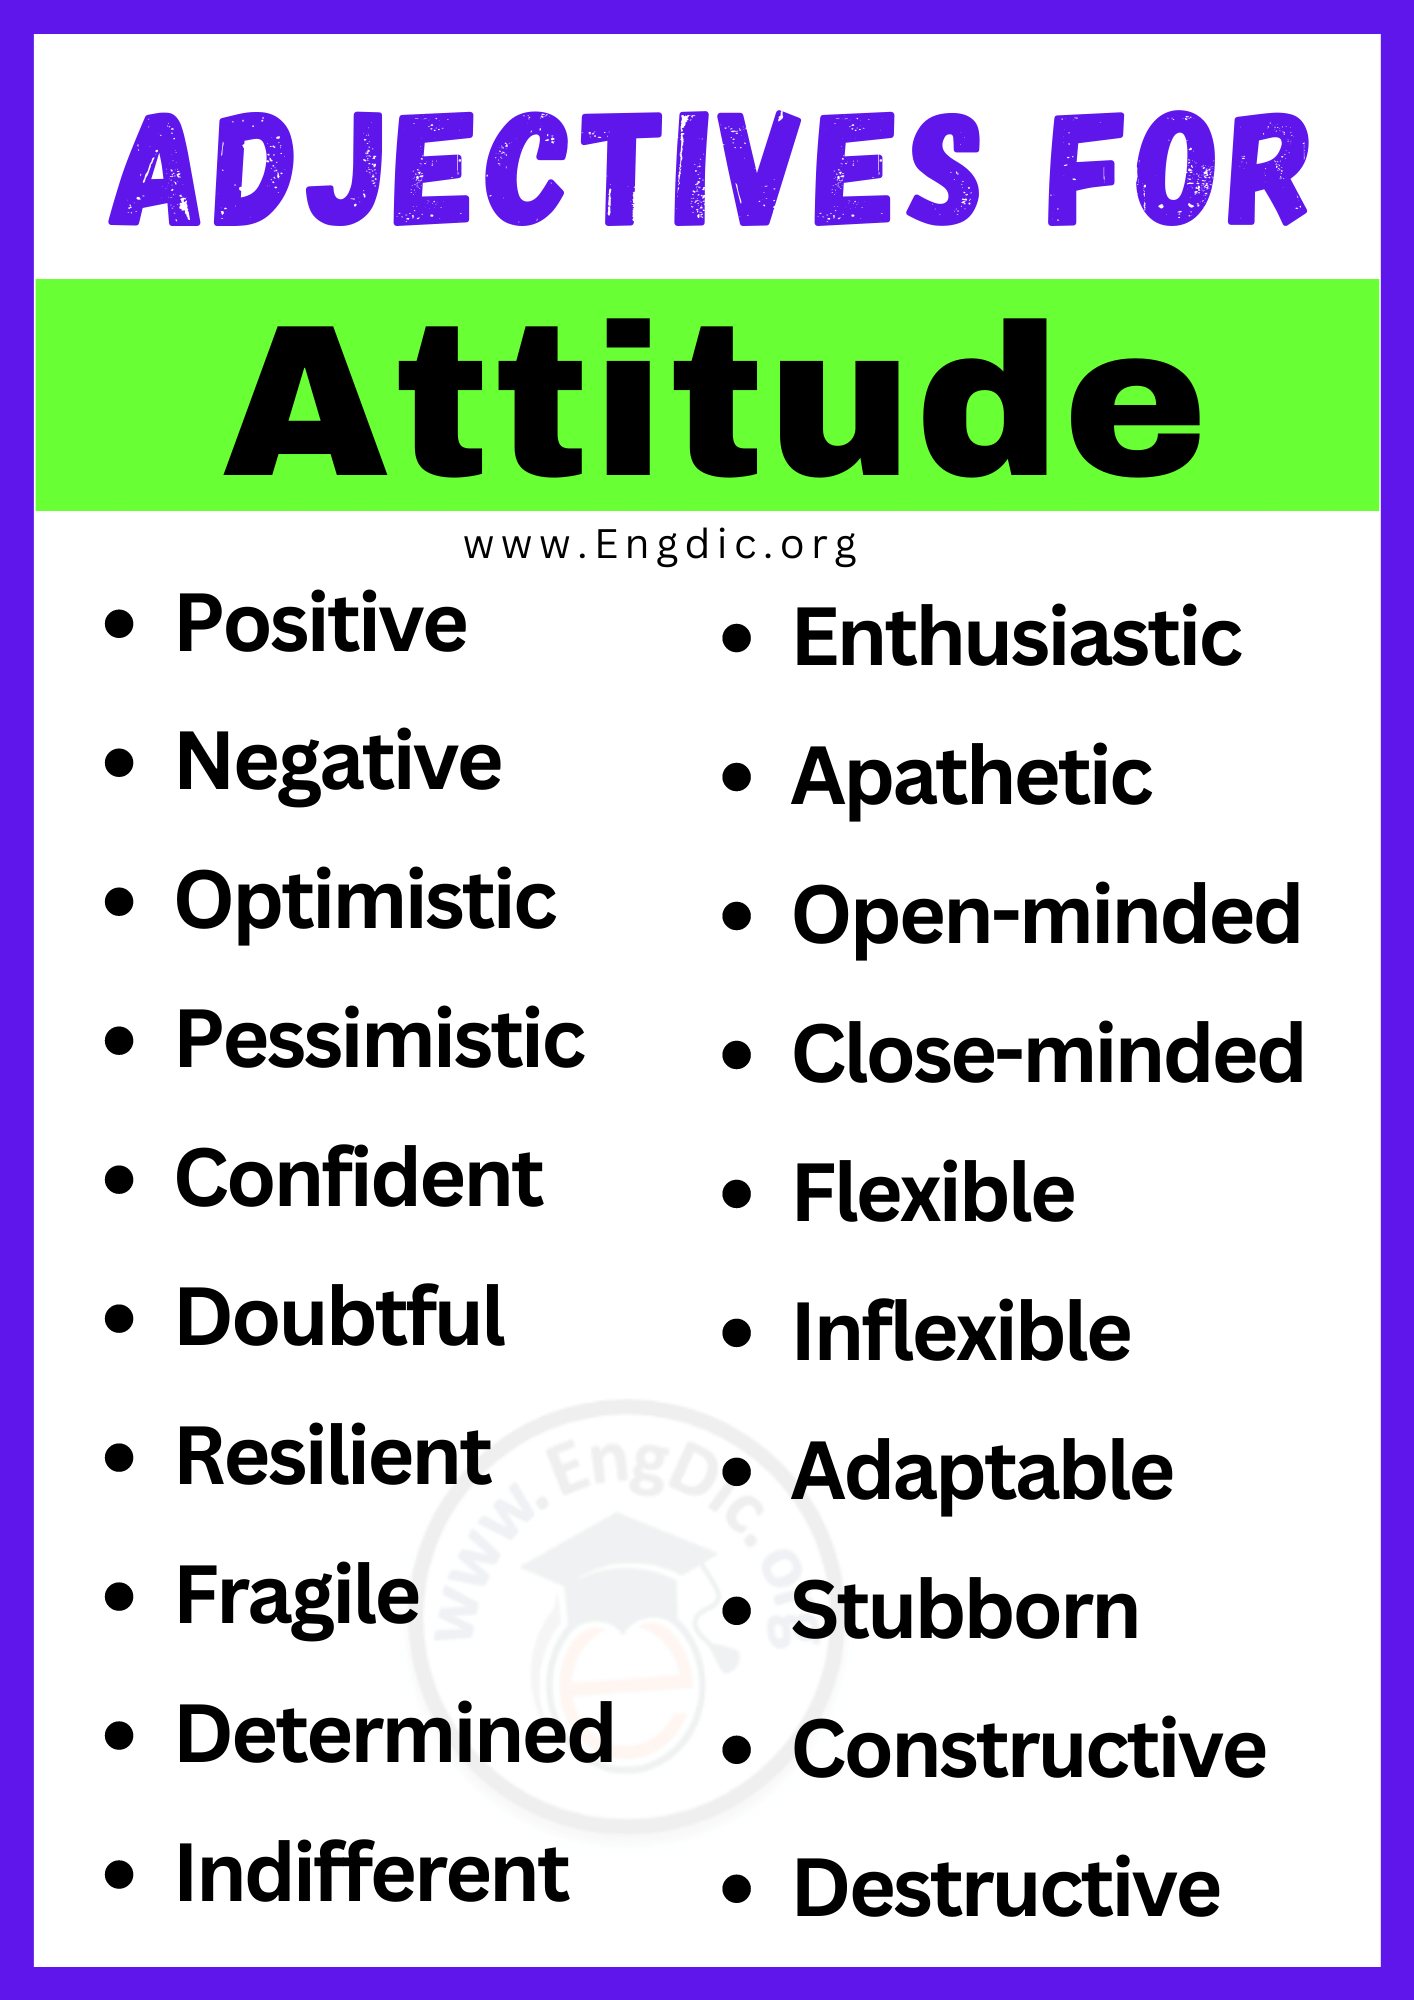 Adjectives for Attitude